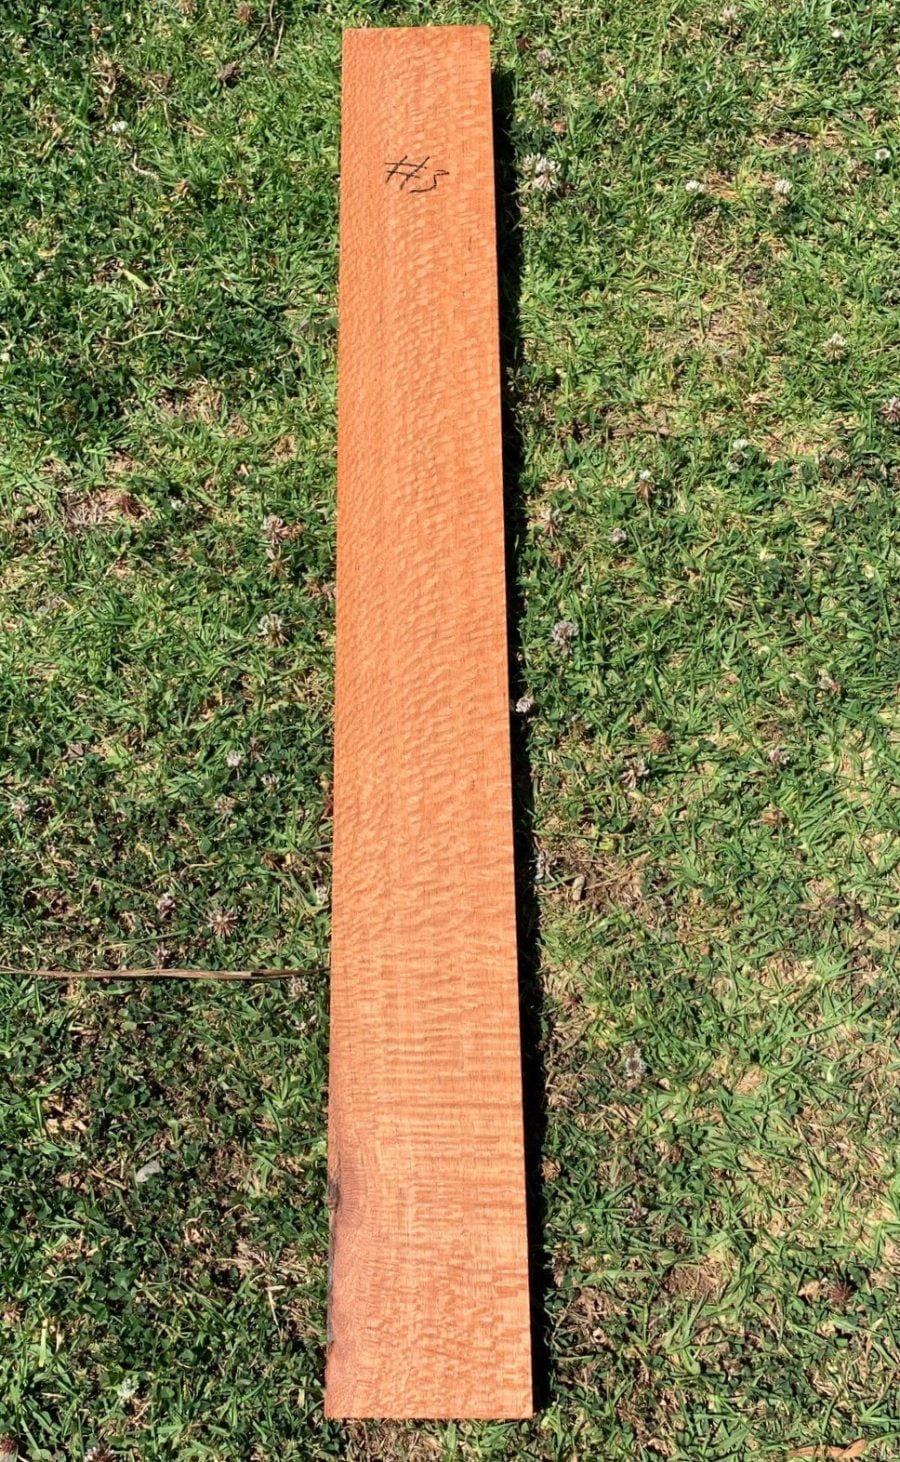 Instrument timber for guitar making